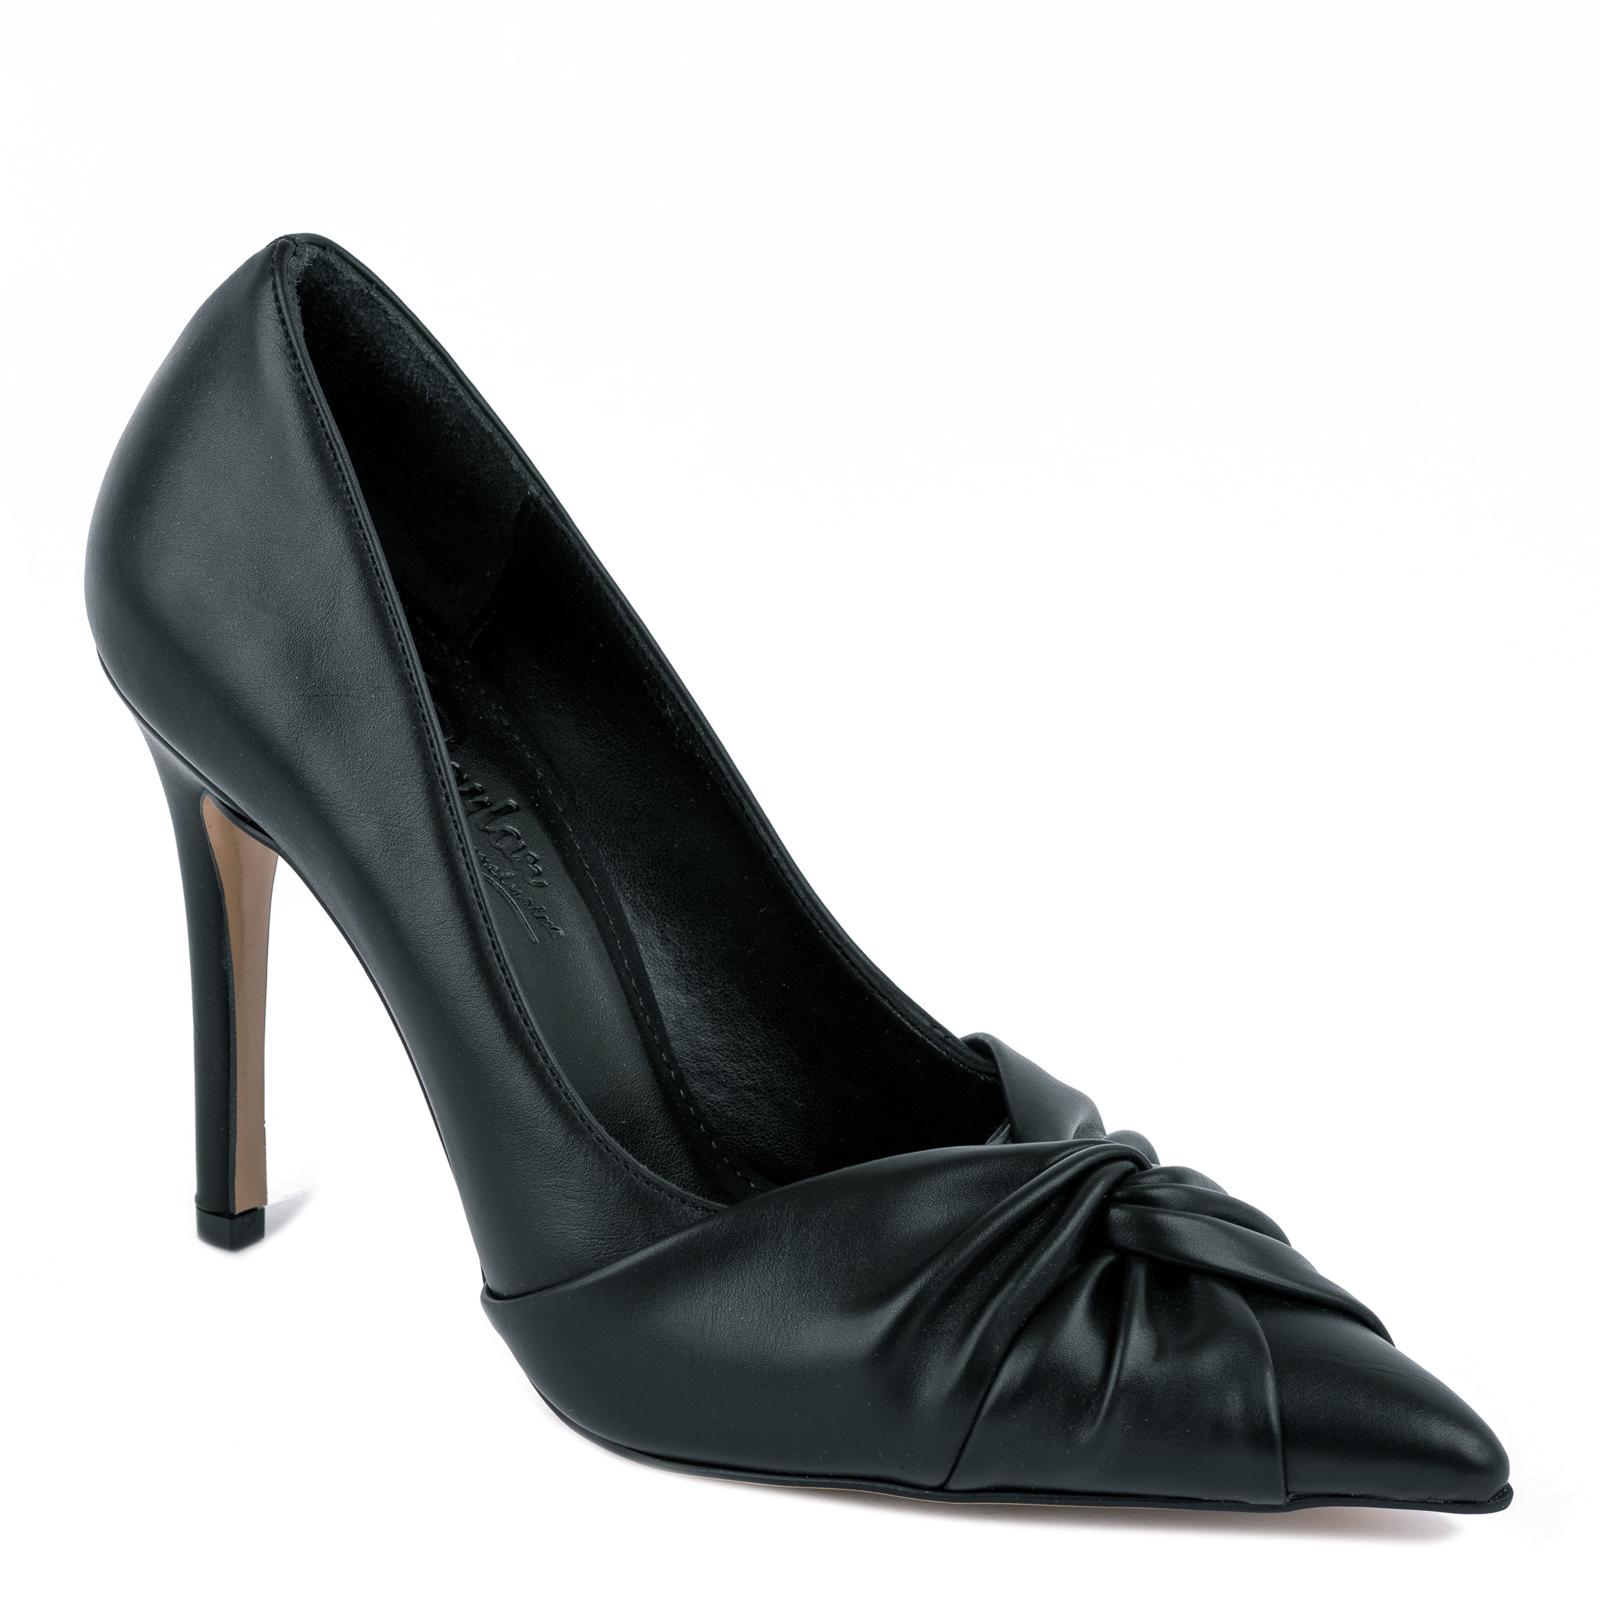 POINTED STILETTO SHOES WITH THIN HEEL - BLACK